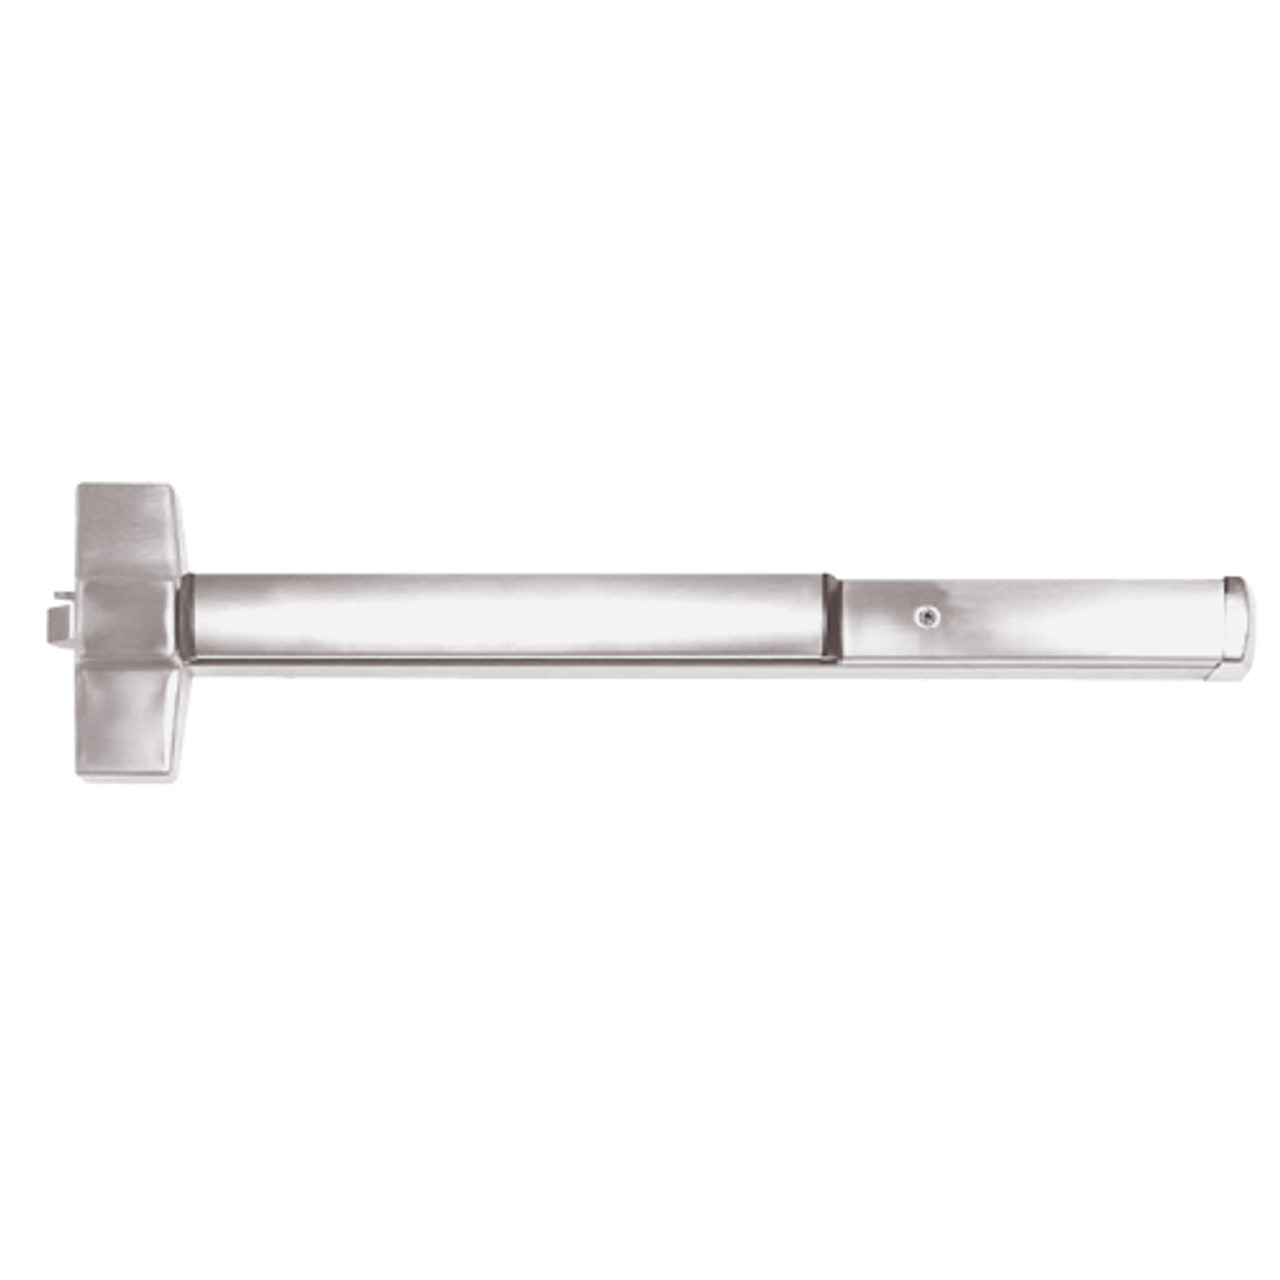 ED5200-630 Corbin ED5200 Series Non Fire Rated Exit Device in Satin Stainless Steel Finish